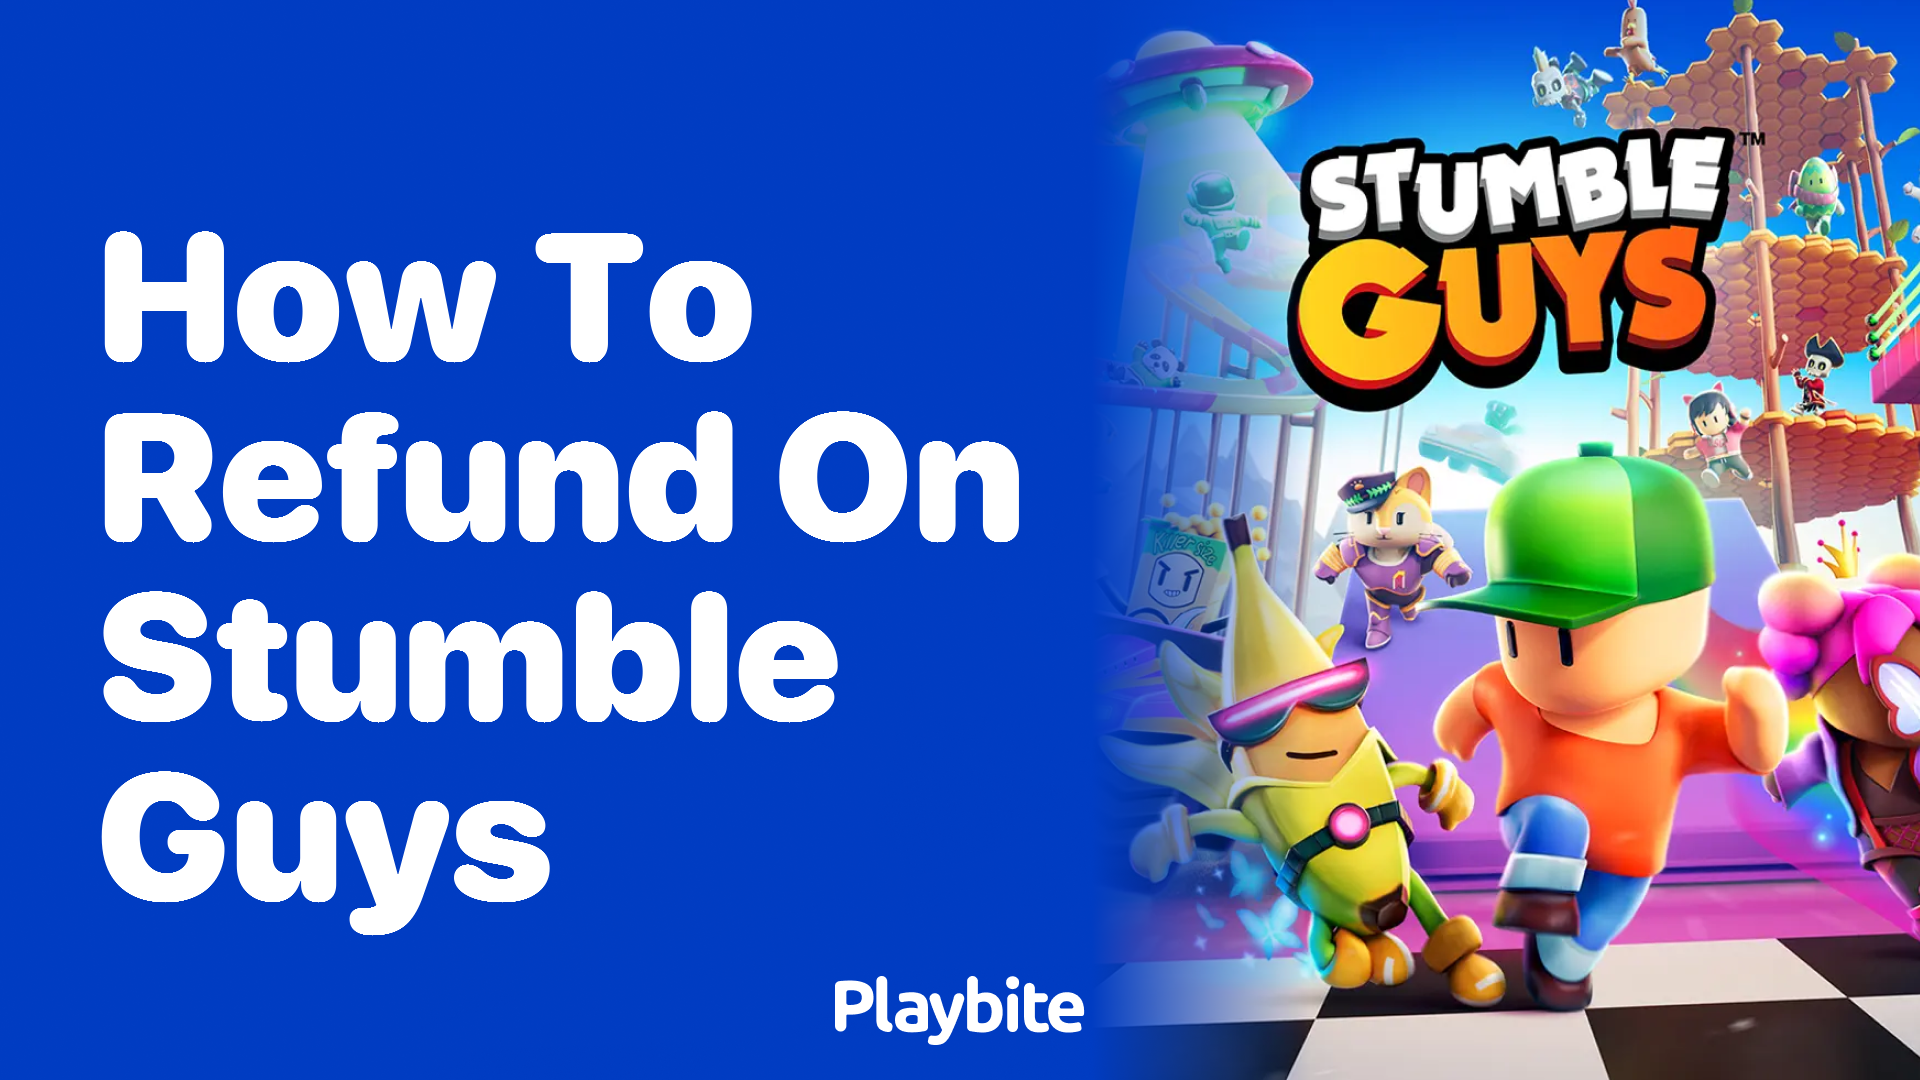 How to Refund on Stumble Guys: A Simple Guide